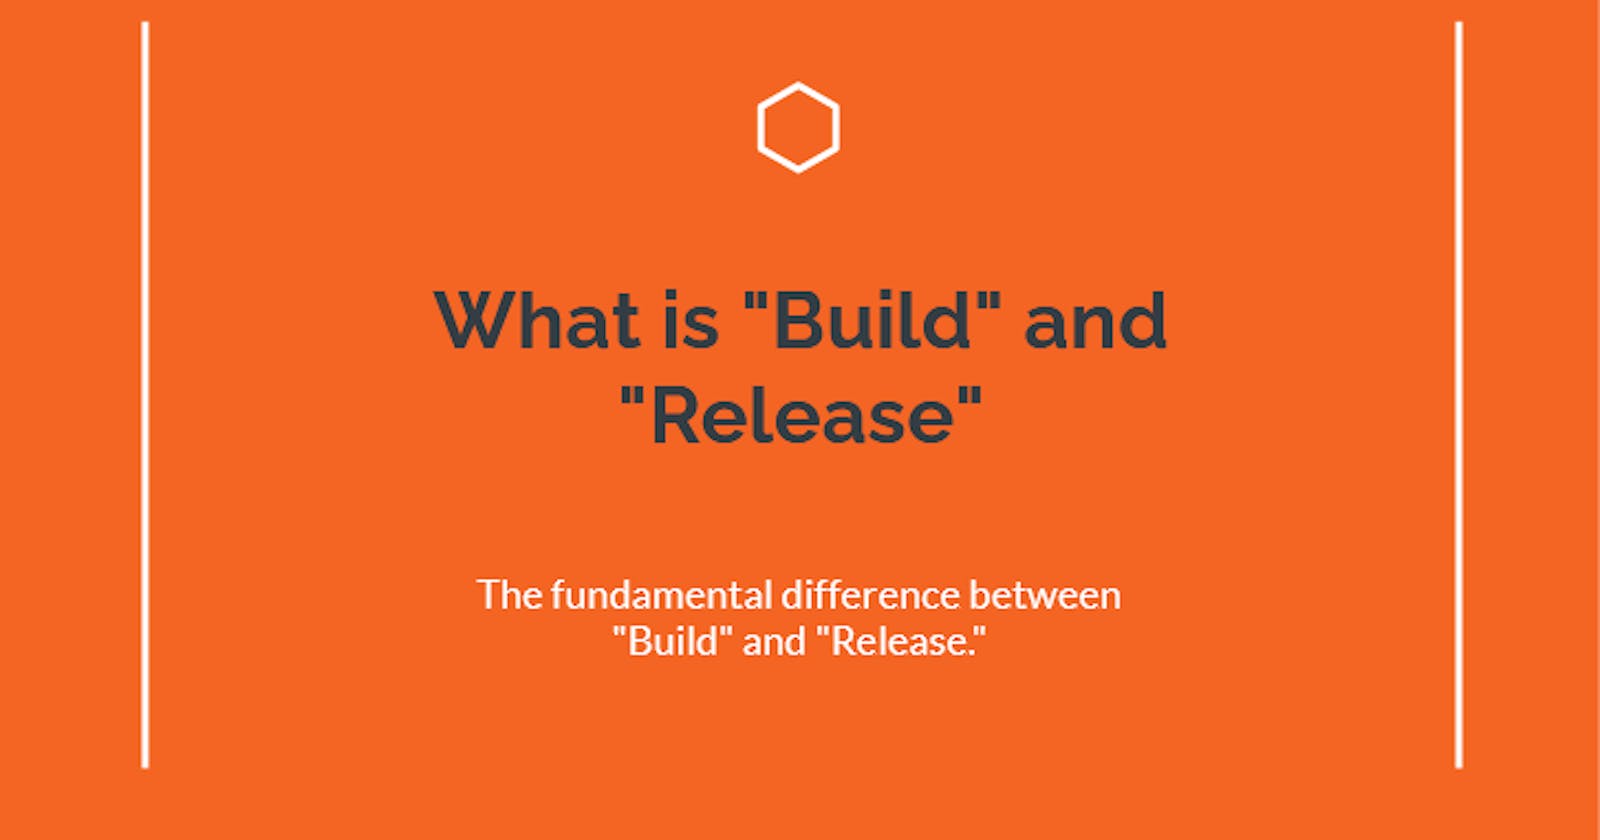 What is "Build" and "Release"